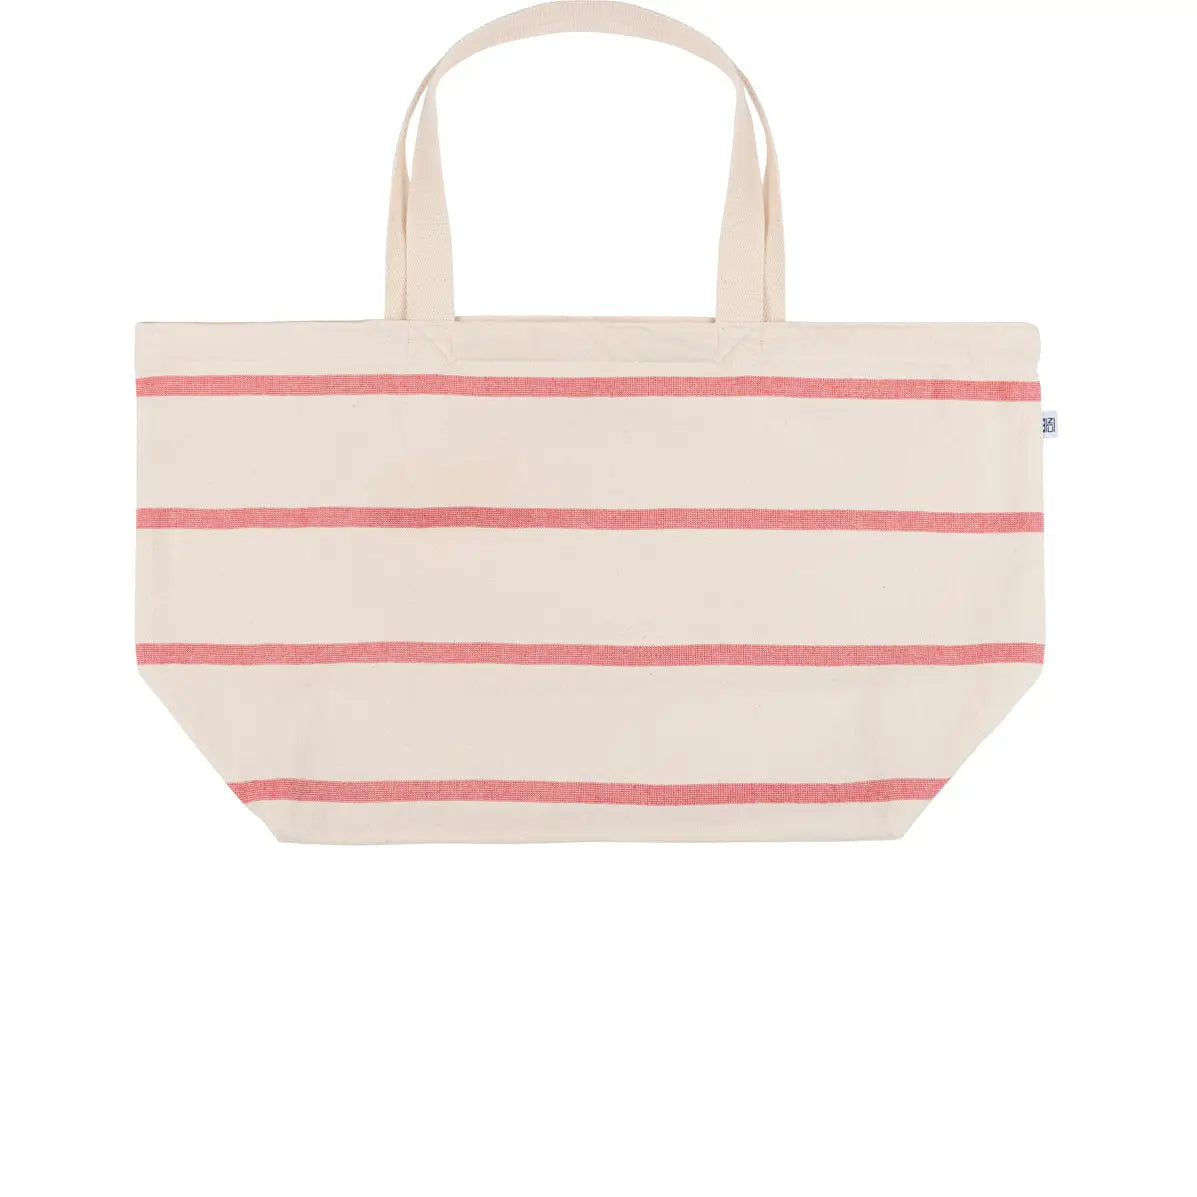 terry towel ivory and red stripe beach bag on white background